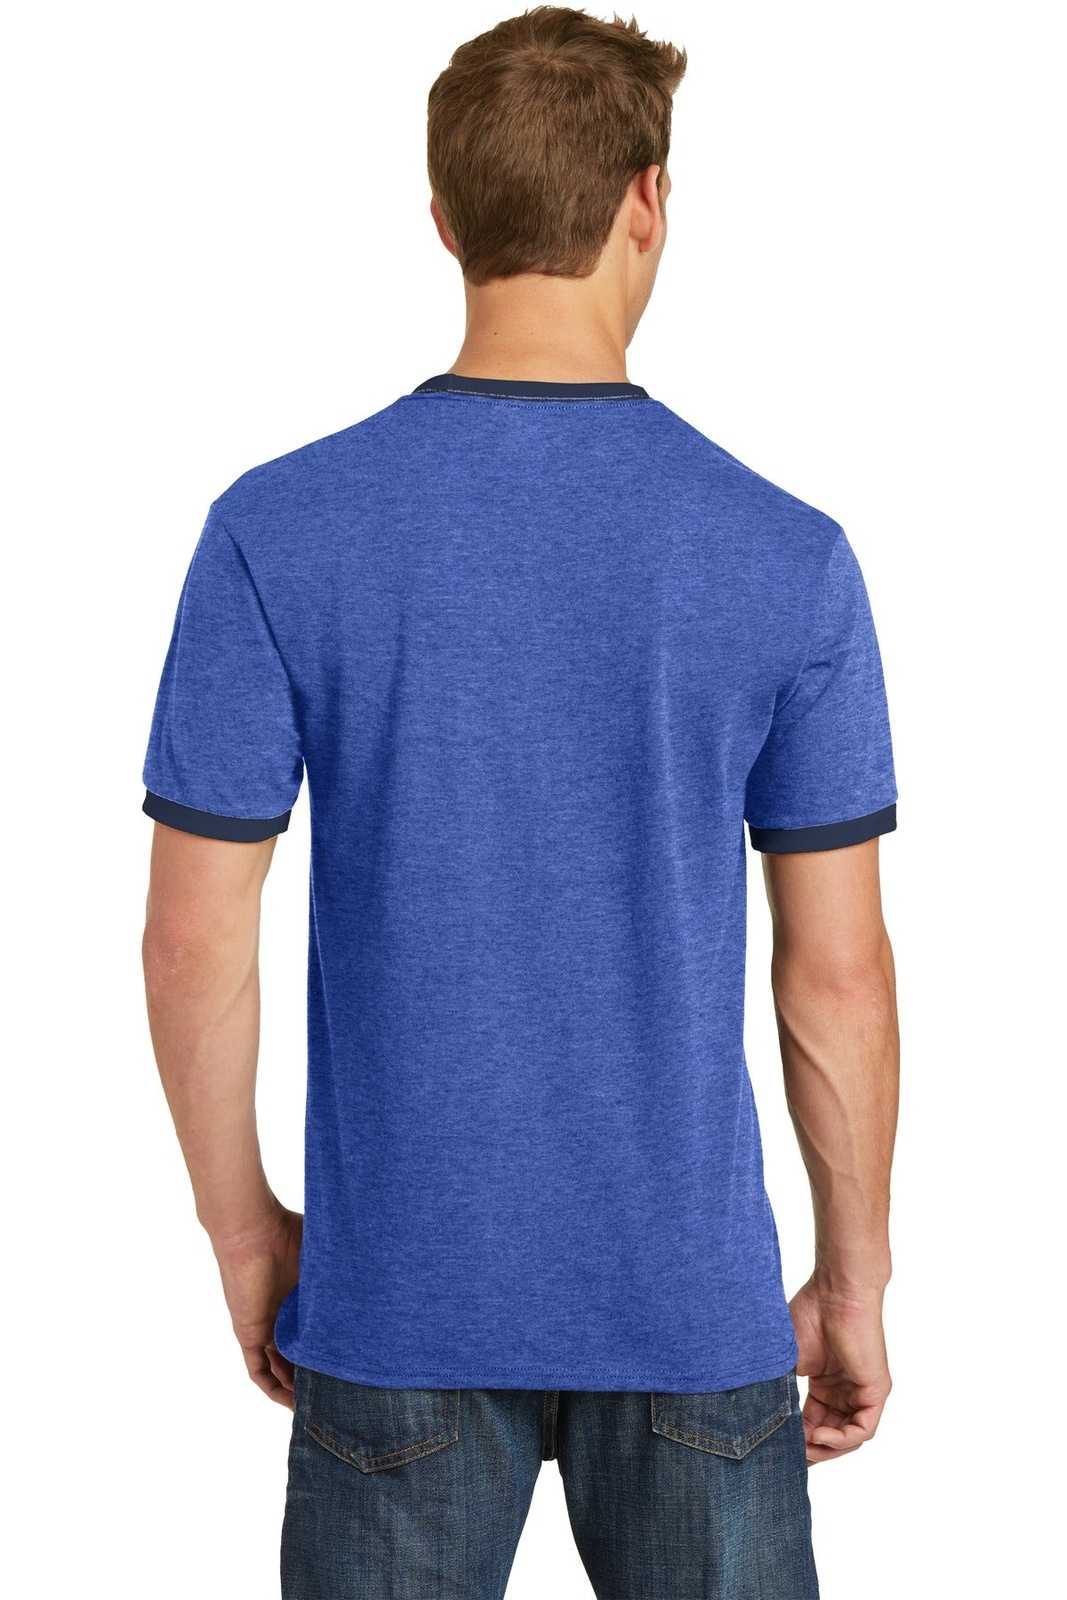 Port &amp; Company PC54R Core Cotton Ringer Tee - Heather Royal Navy - HIT a Double - 2